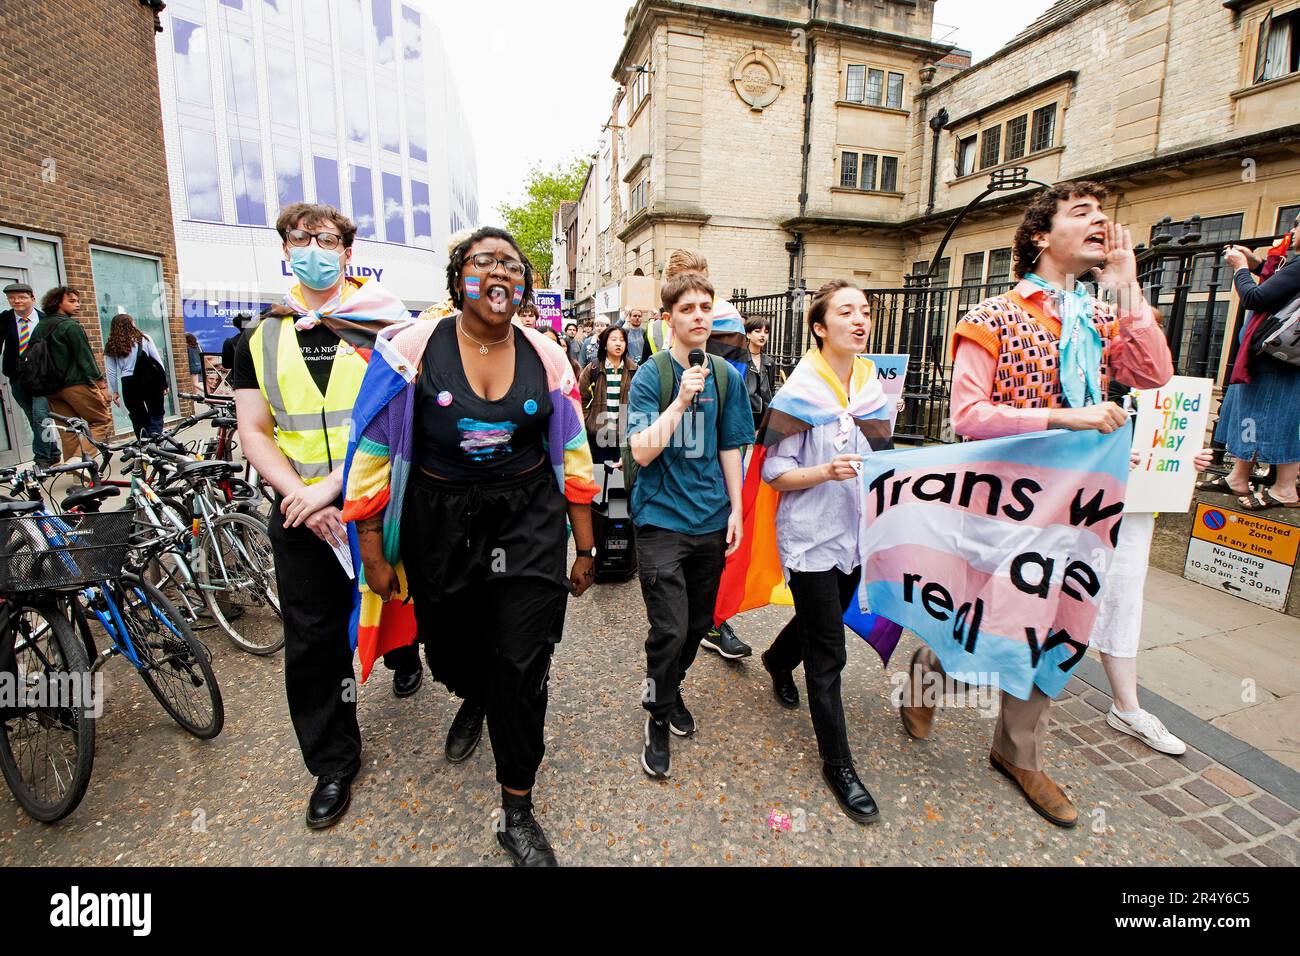 Oxford, UK, 30th May 2023. Oxford Union inviting Kathleen Stock to debate. Trans rally, march and protest.  Credit: Stephen Bell/Alamy Live News Stock Photo